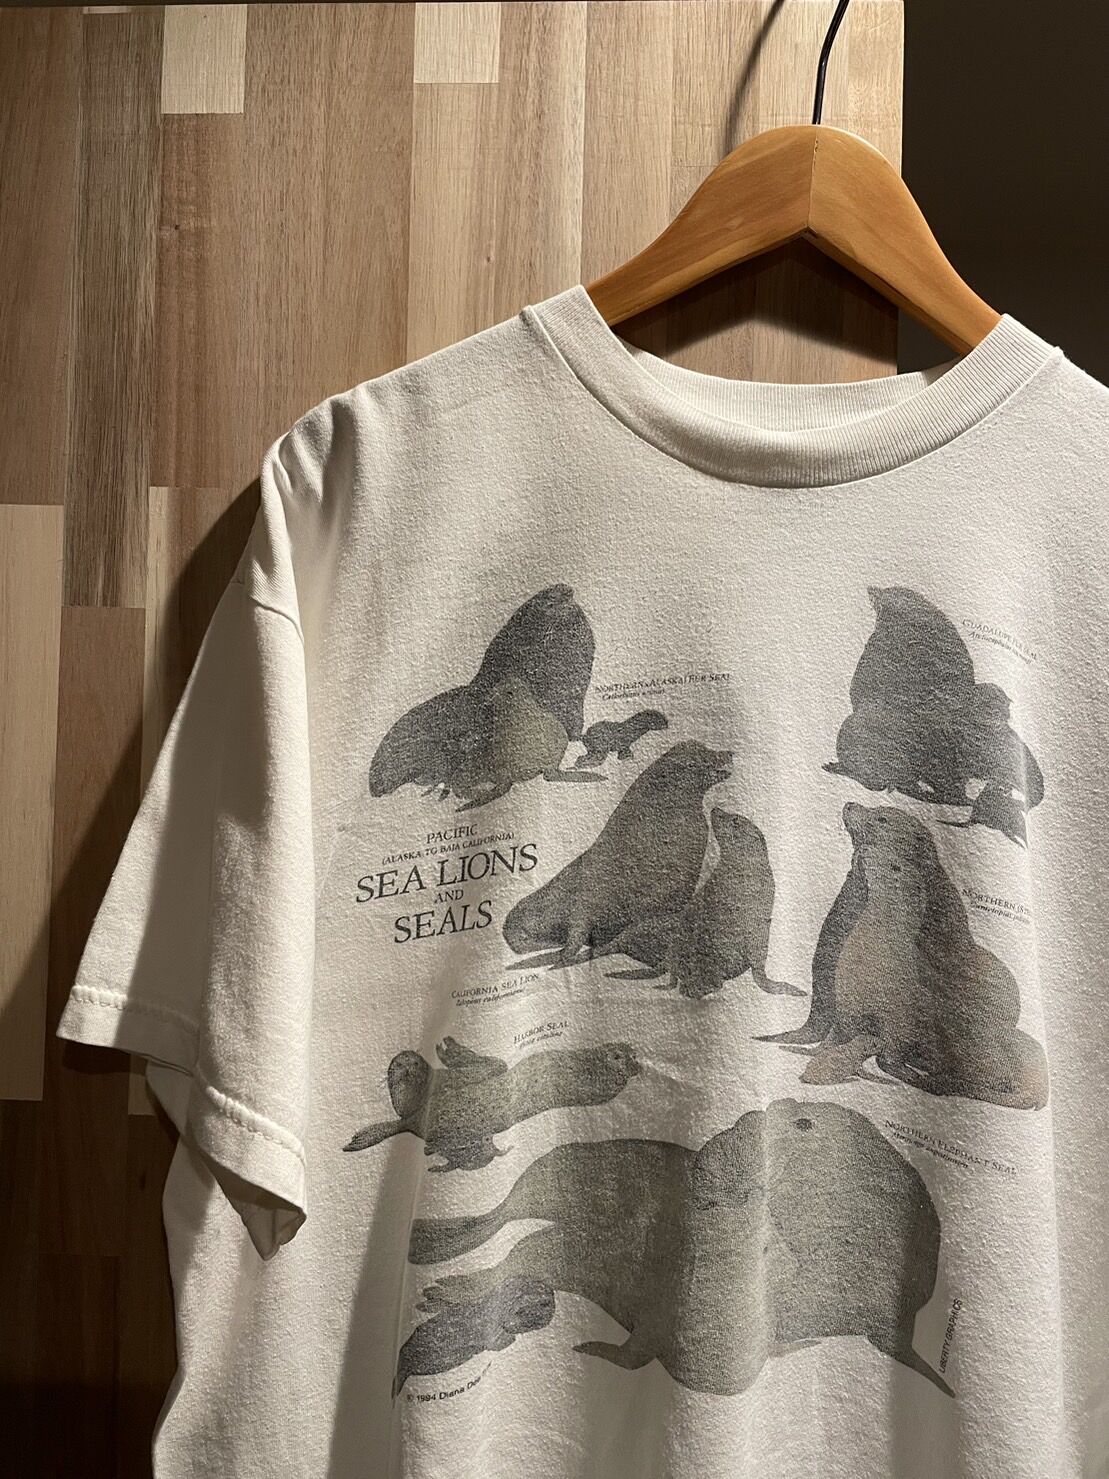 90s patagonia beneficial T's アメリカ製 オーガニック デザイン 